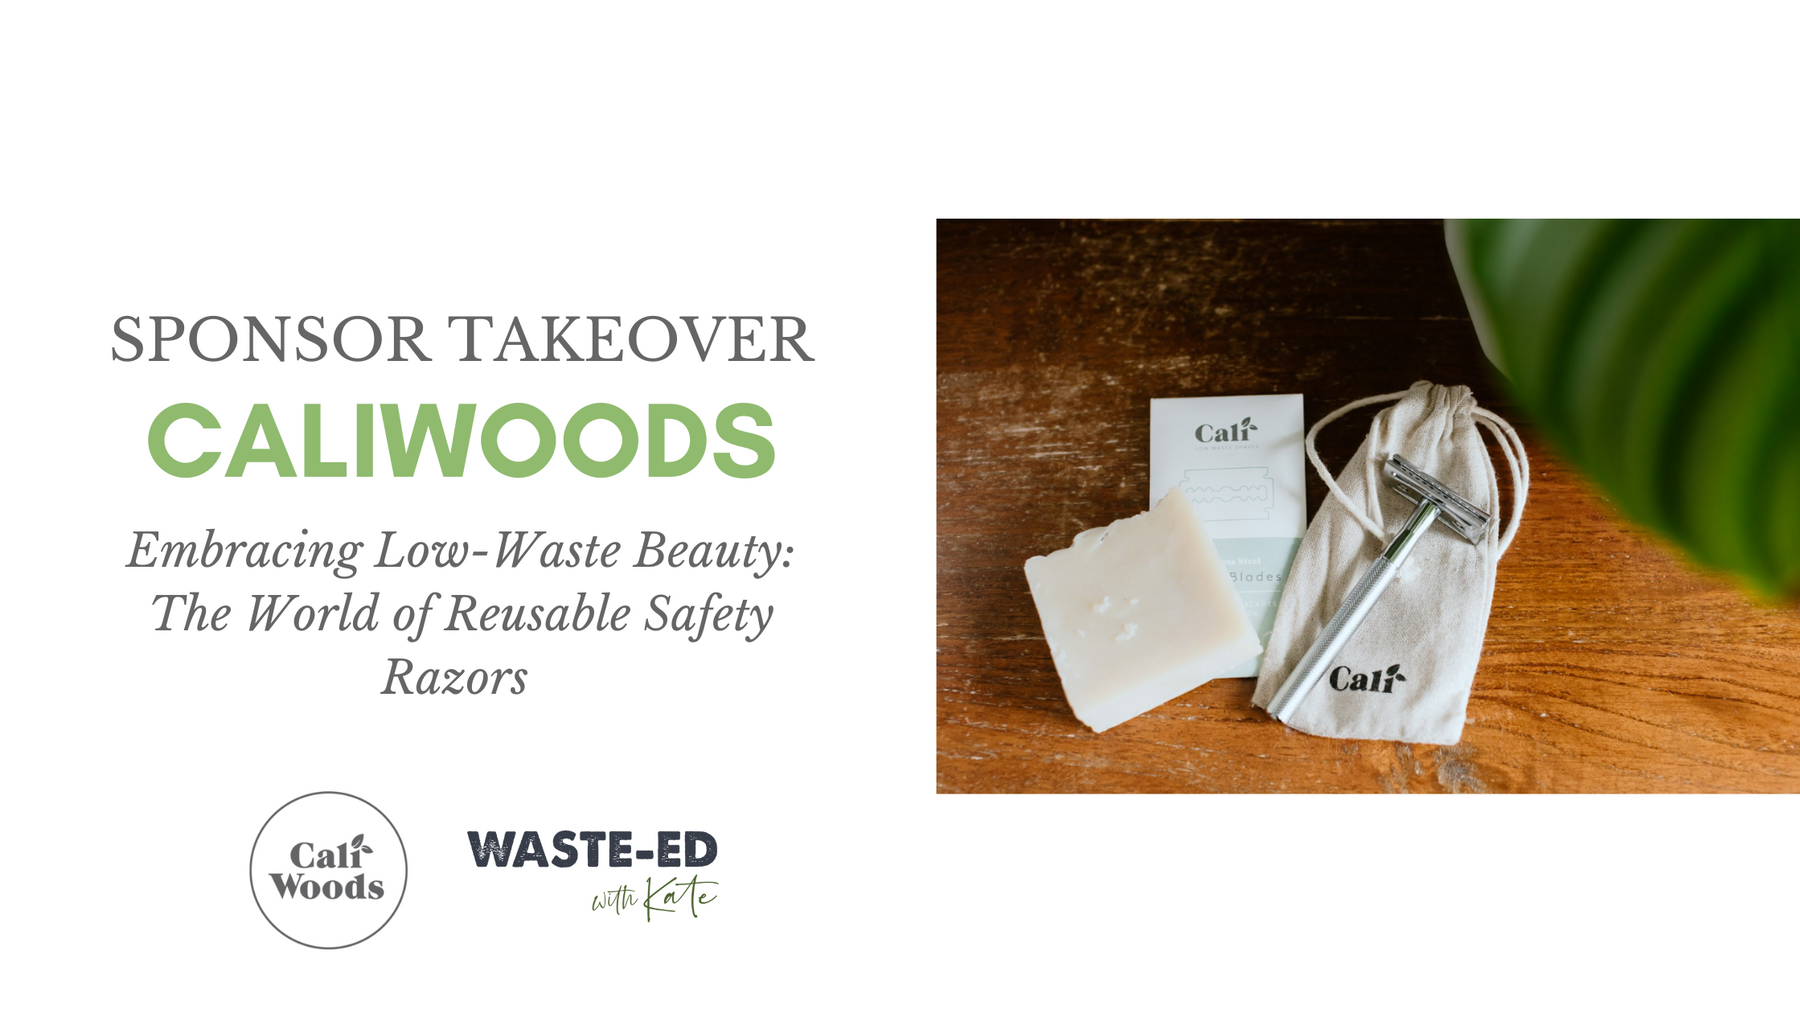 Sponsor Blog: Embracing Low-Waste Beauty - The World of Reusable Safety Razors